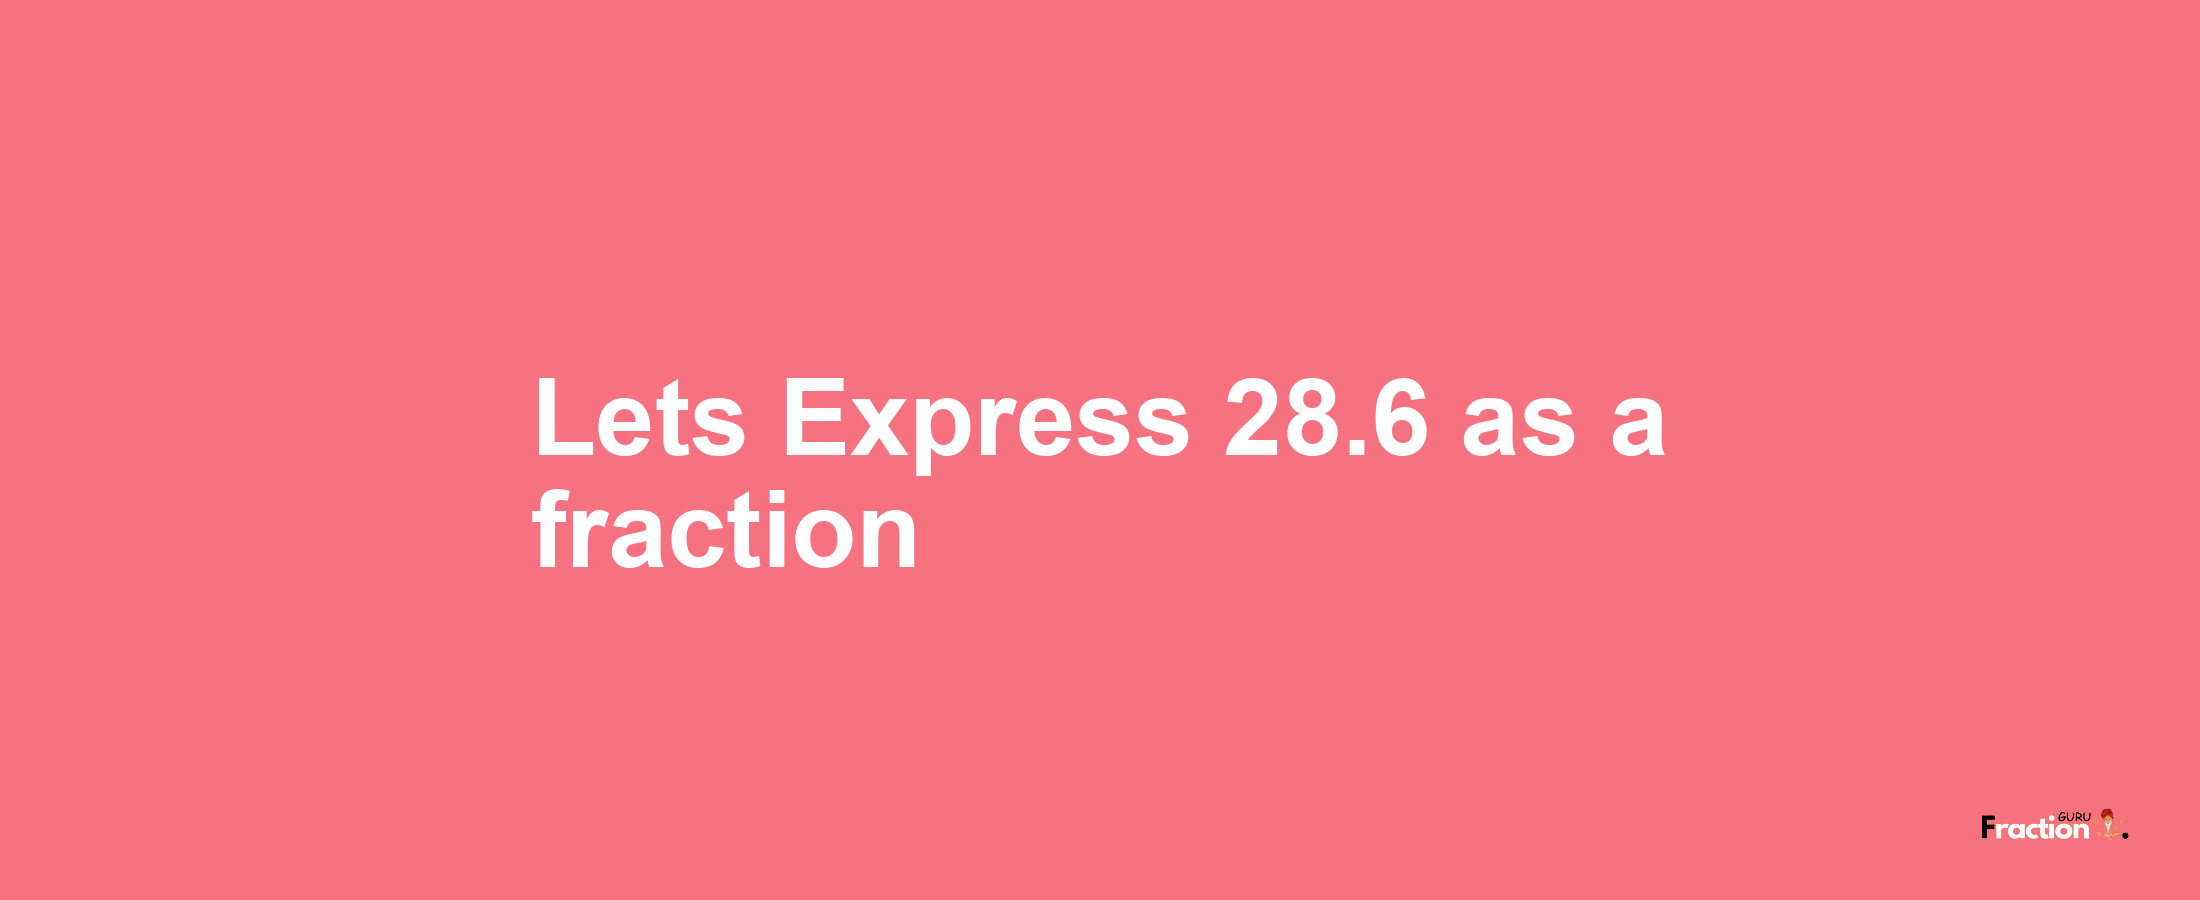 Lets Express 28.6 as afraction